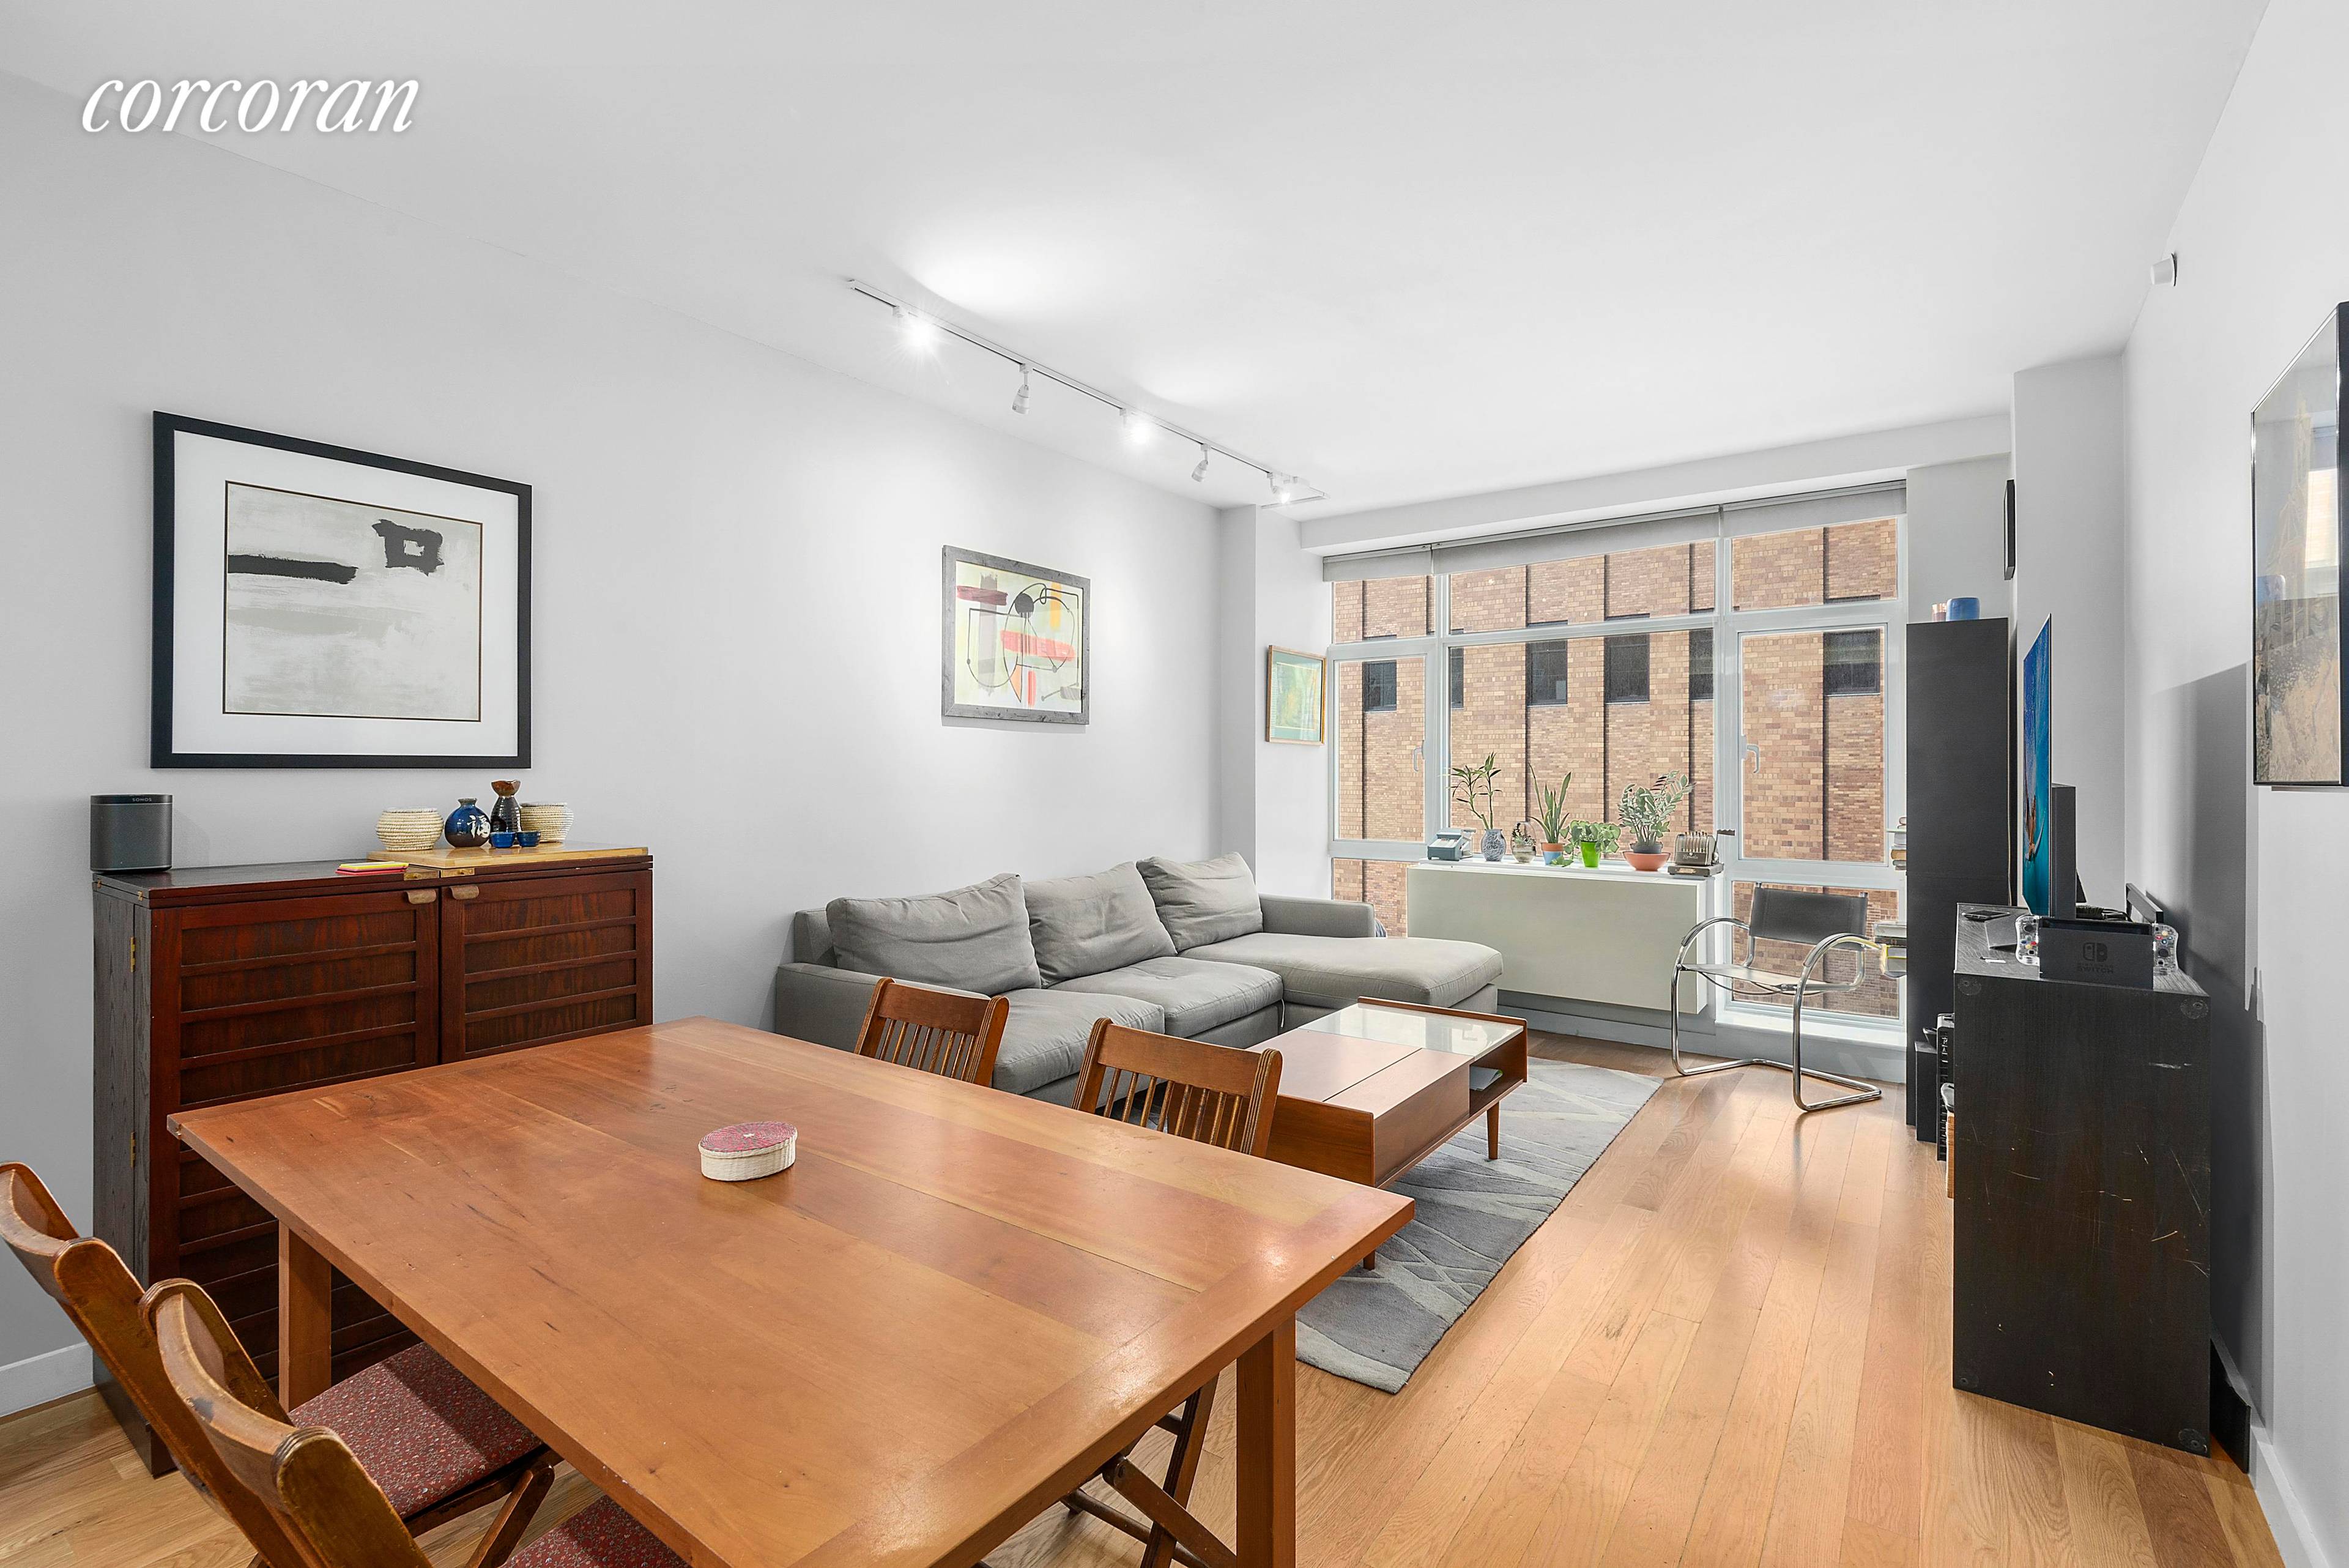 189 Schermerhorn Street 6F is a large one bedroom with home office in a highly coveted full service condominium building at the crossroads of Downtown Brooklyn and Boerum Hill.